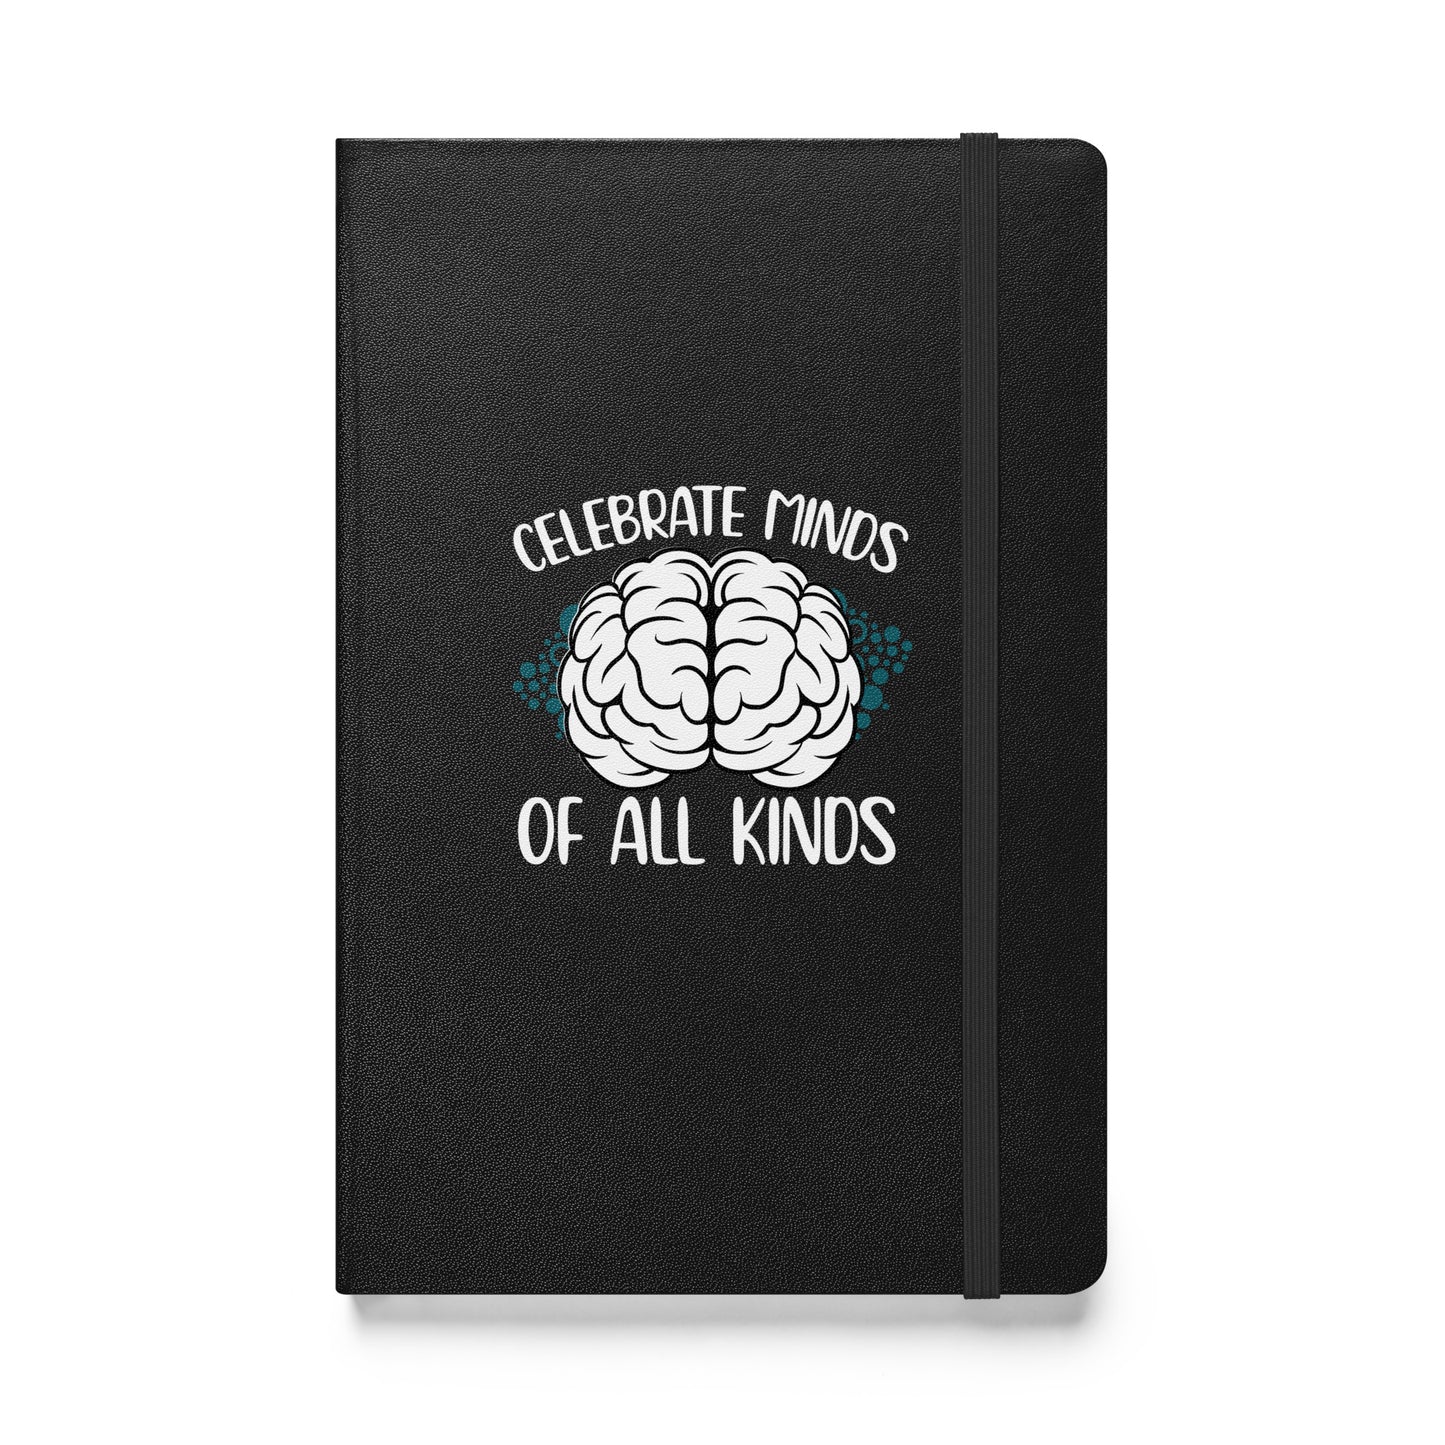 Celebrate Minds of All Kinds Hardcover Bound Journal